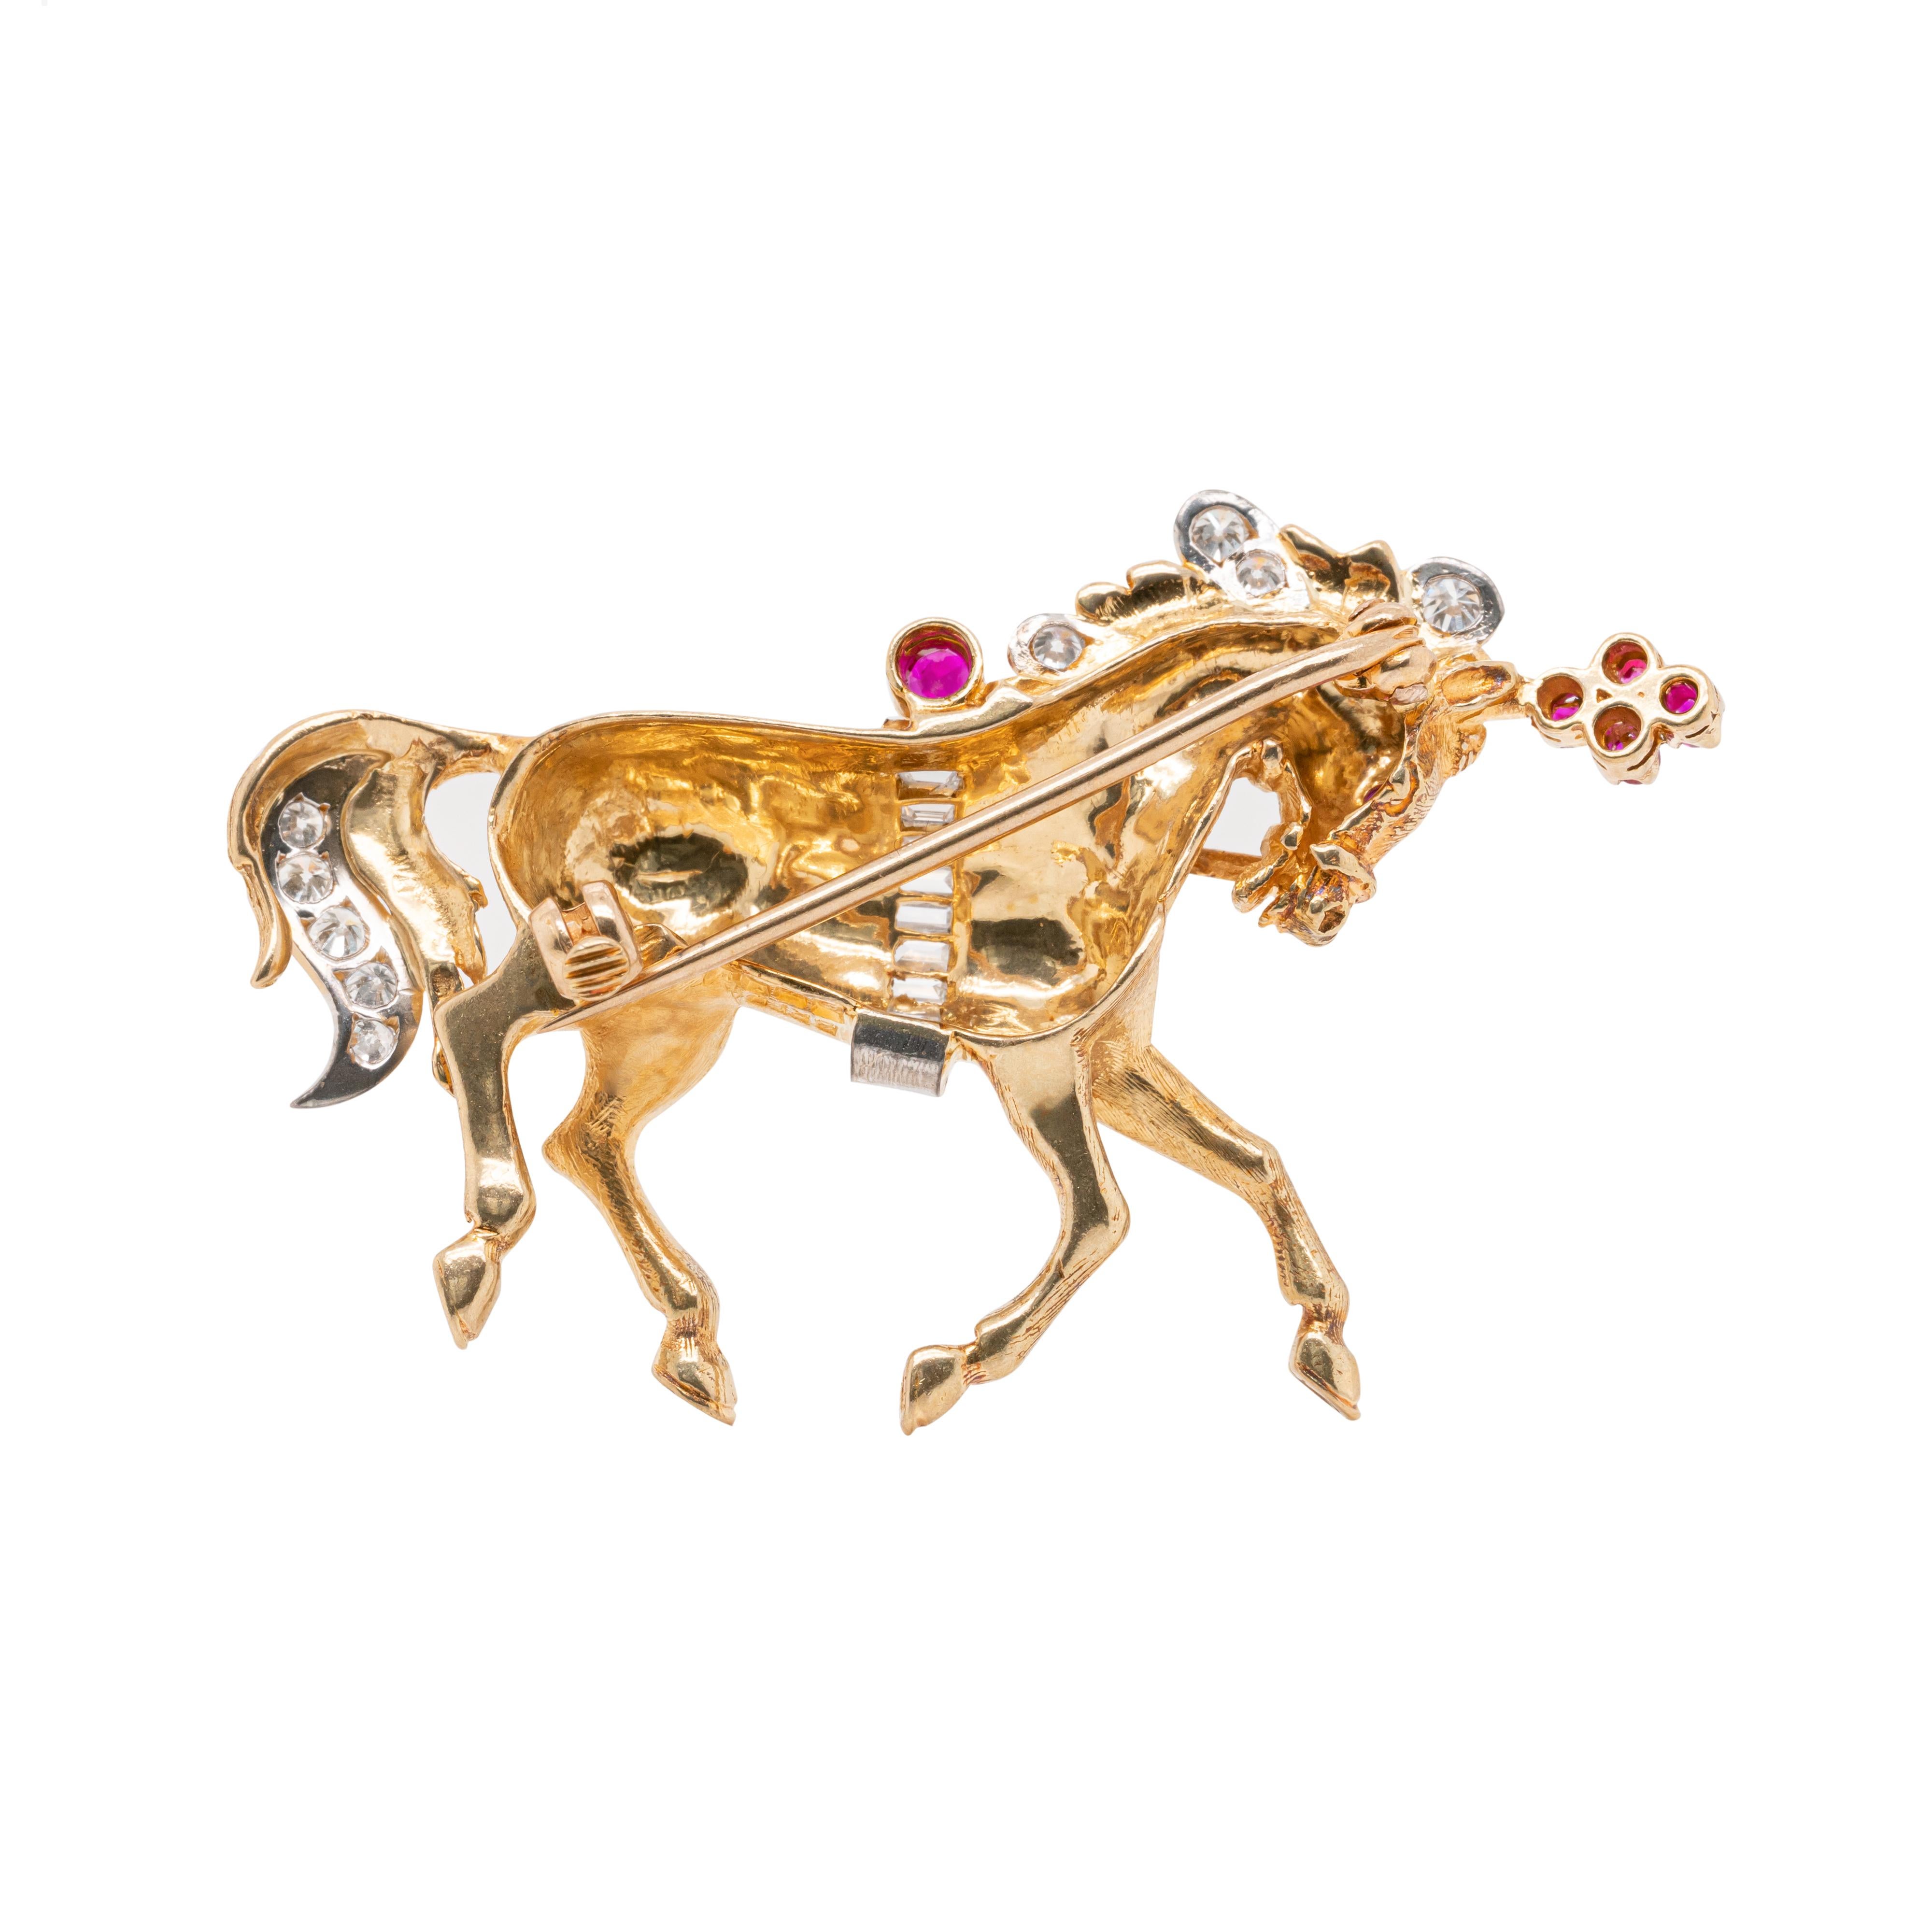 This wonderful horse brooch designed by British jeweller, Ben Rosenfeld is crafted in 18 carat yellow gold. The piece is set with 6 rubies. totalling to an approximate weight of 0.14 carats and further inlaid with 9 baguette cut diamonds and 9 round